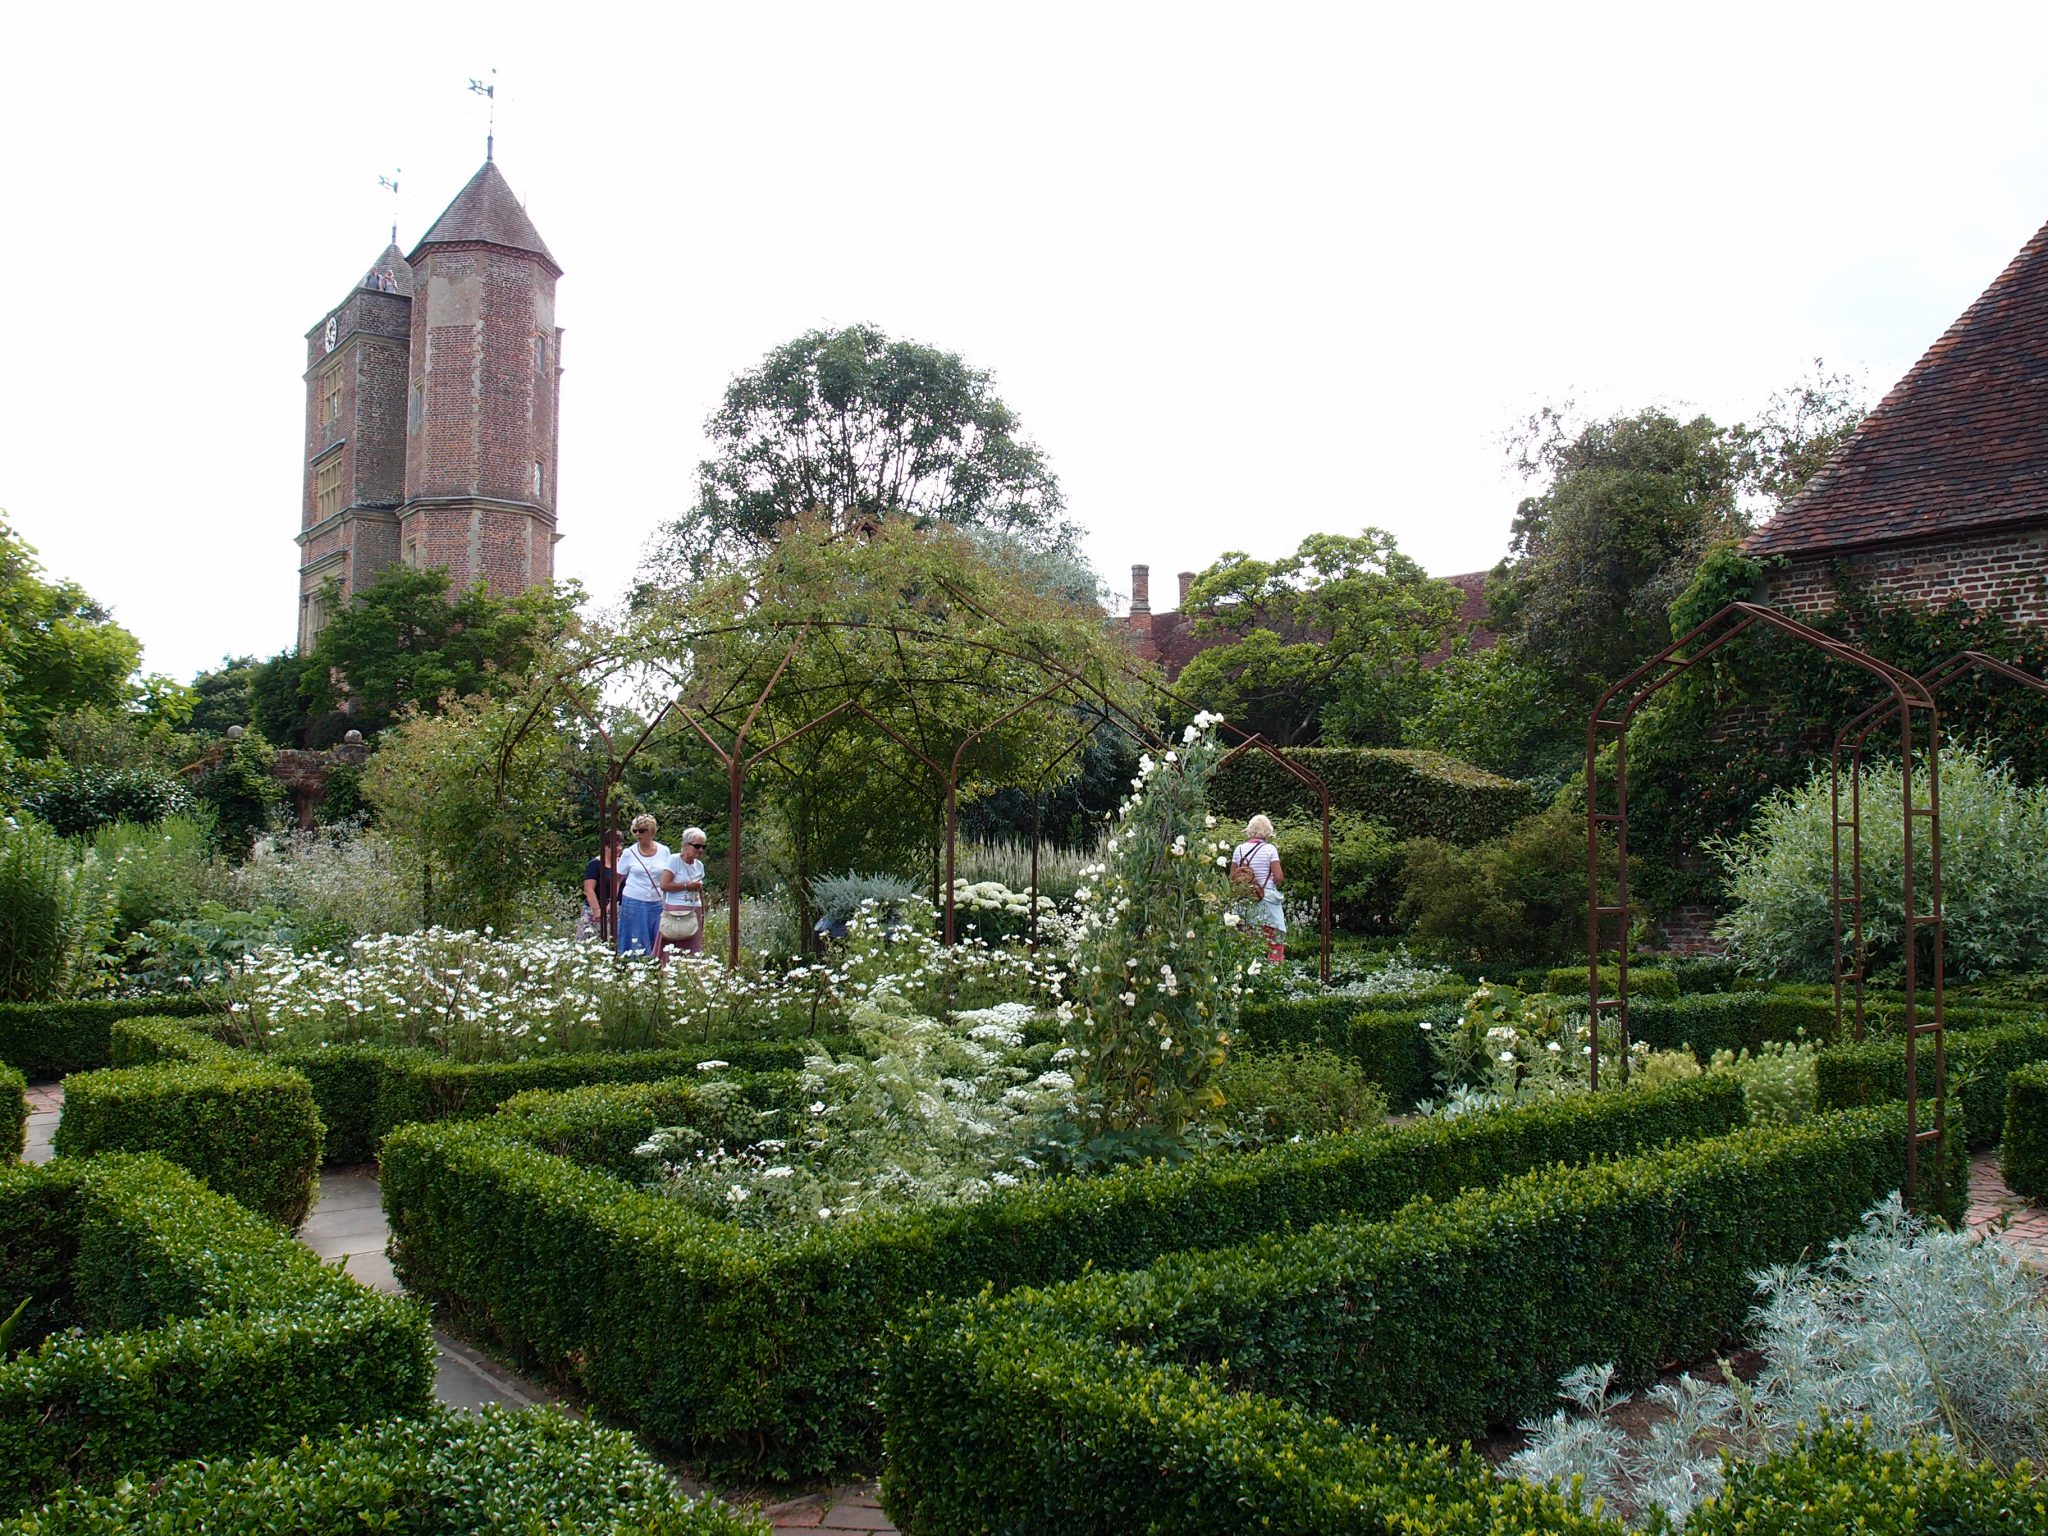 The White Garden was the last of the gardens at Sissinghurst to receive its identity. Until 1950, it had been filled with a miscellaneous collection of flowers, in mixed colors. It was Vita's idea to plant a garden where white flowers would glow in the moonlight.